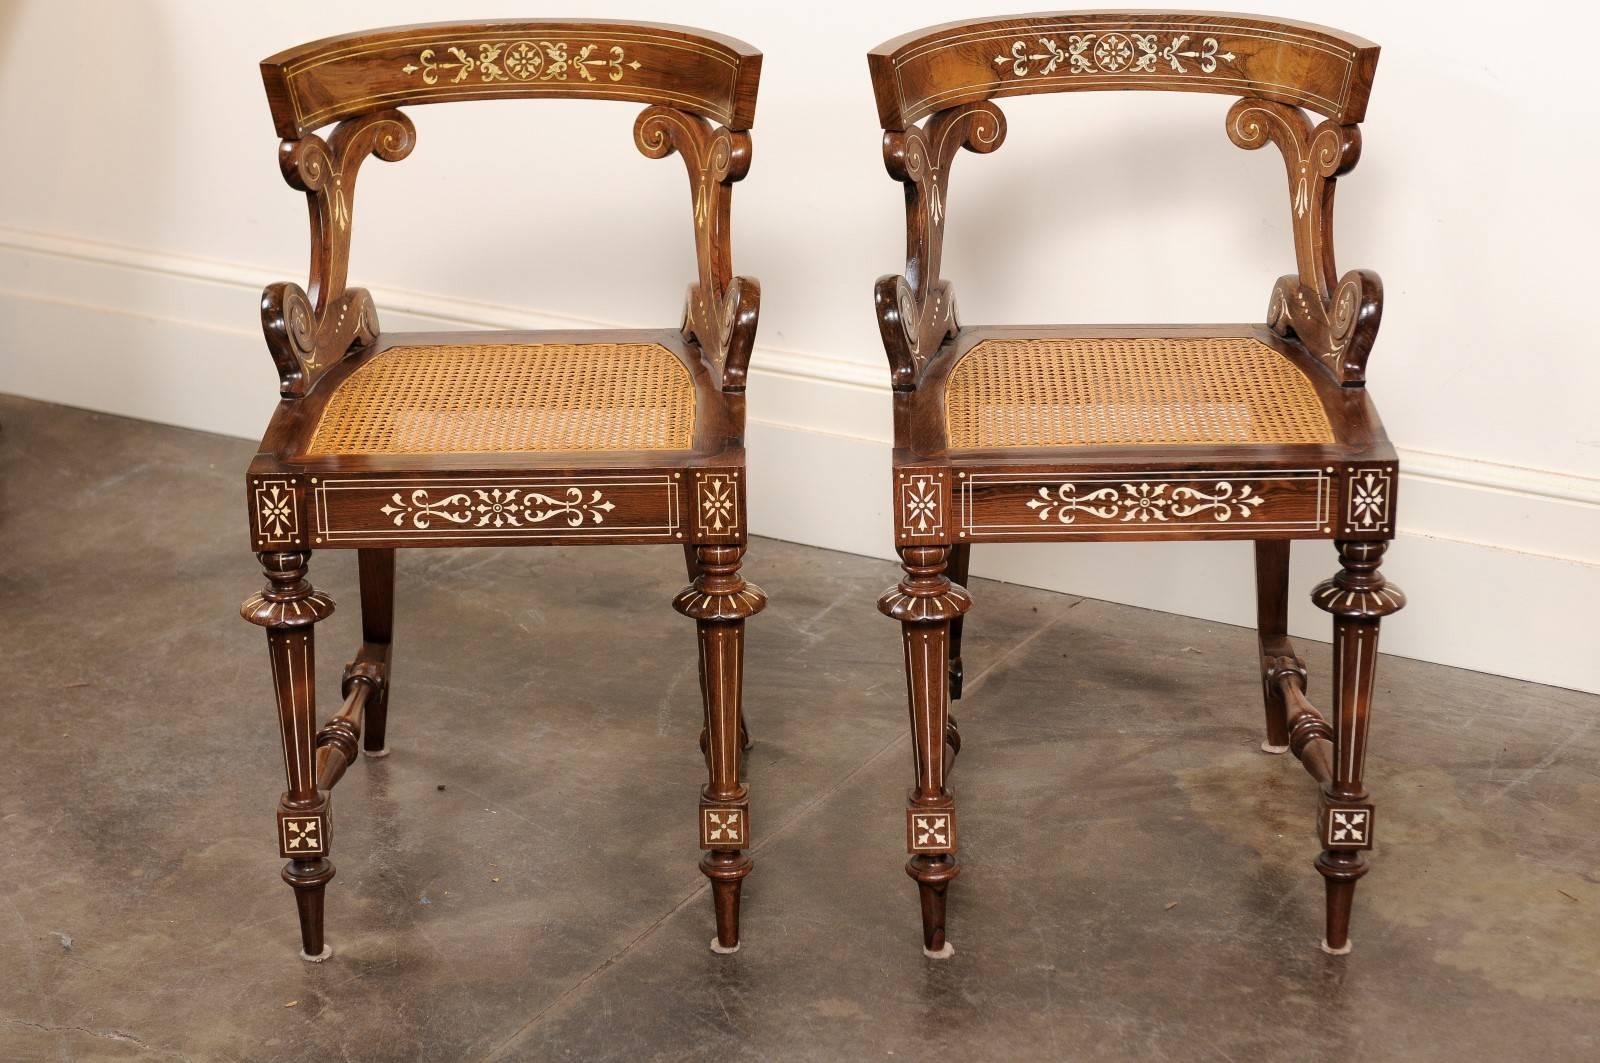 Pair of Barrel Back Wooden Slipper Chairs with Marquetry Décor and Cane Seats 2